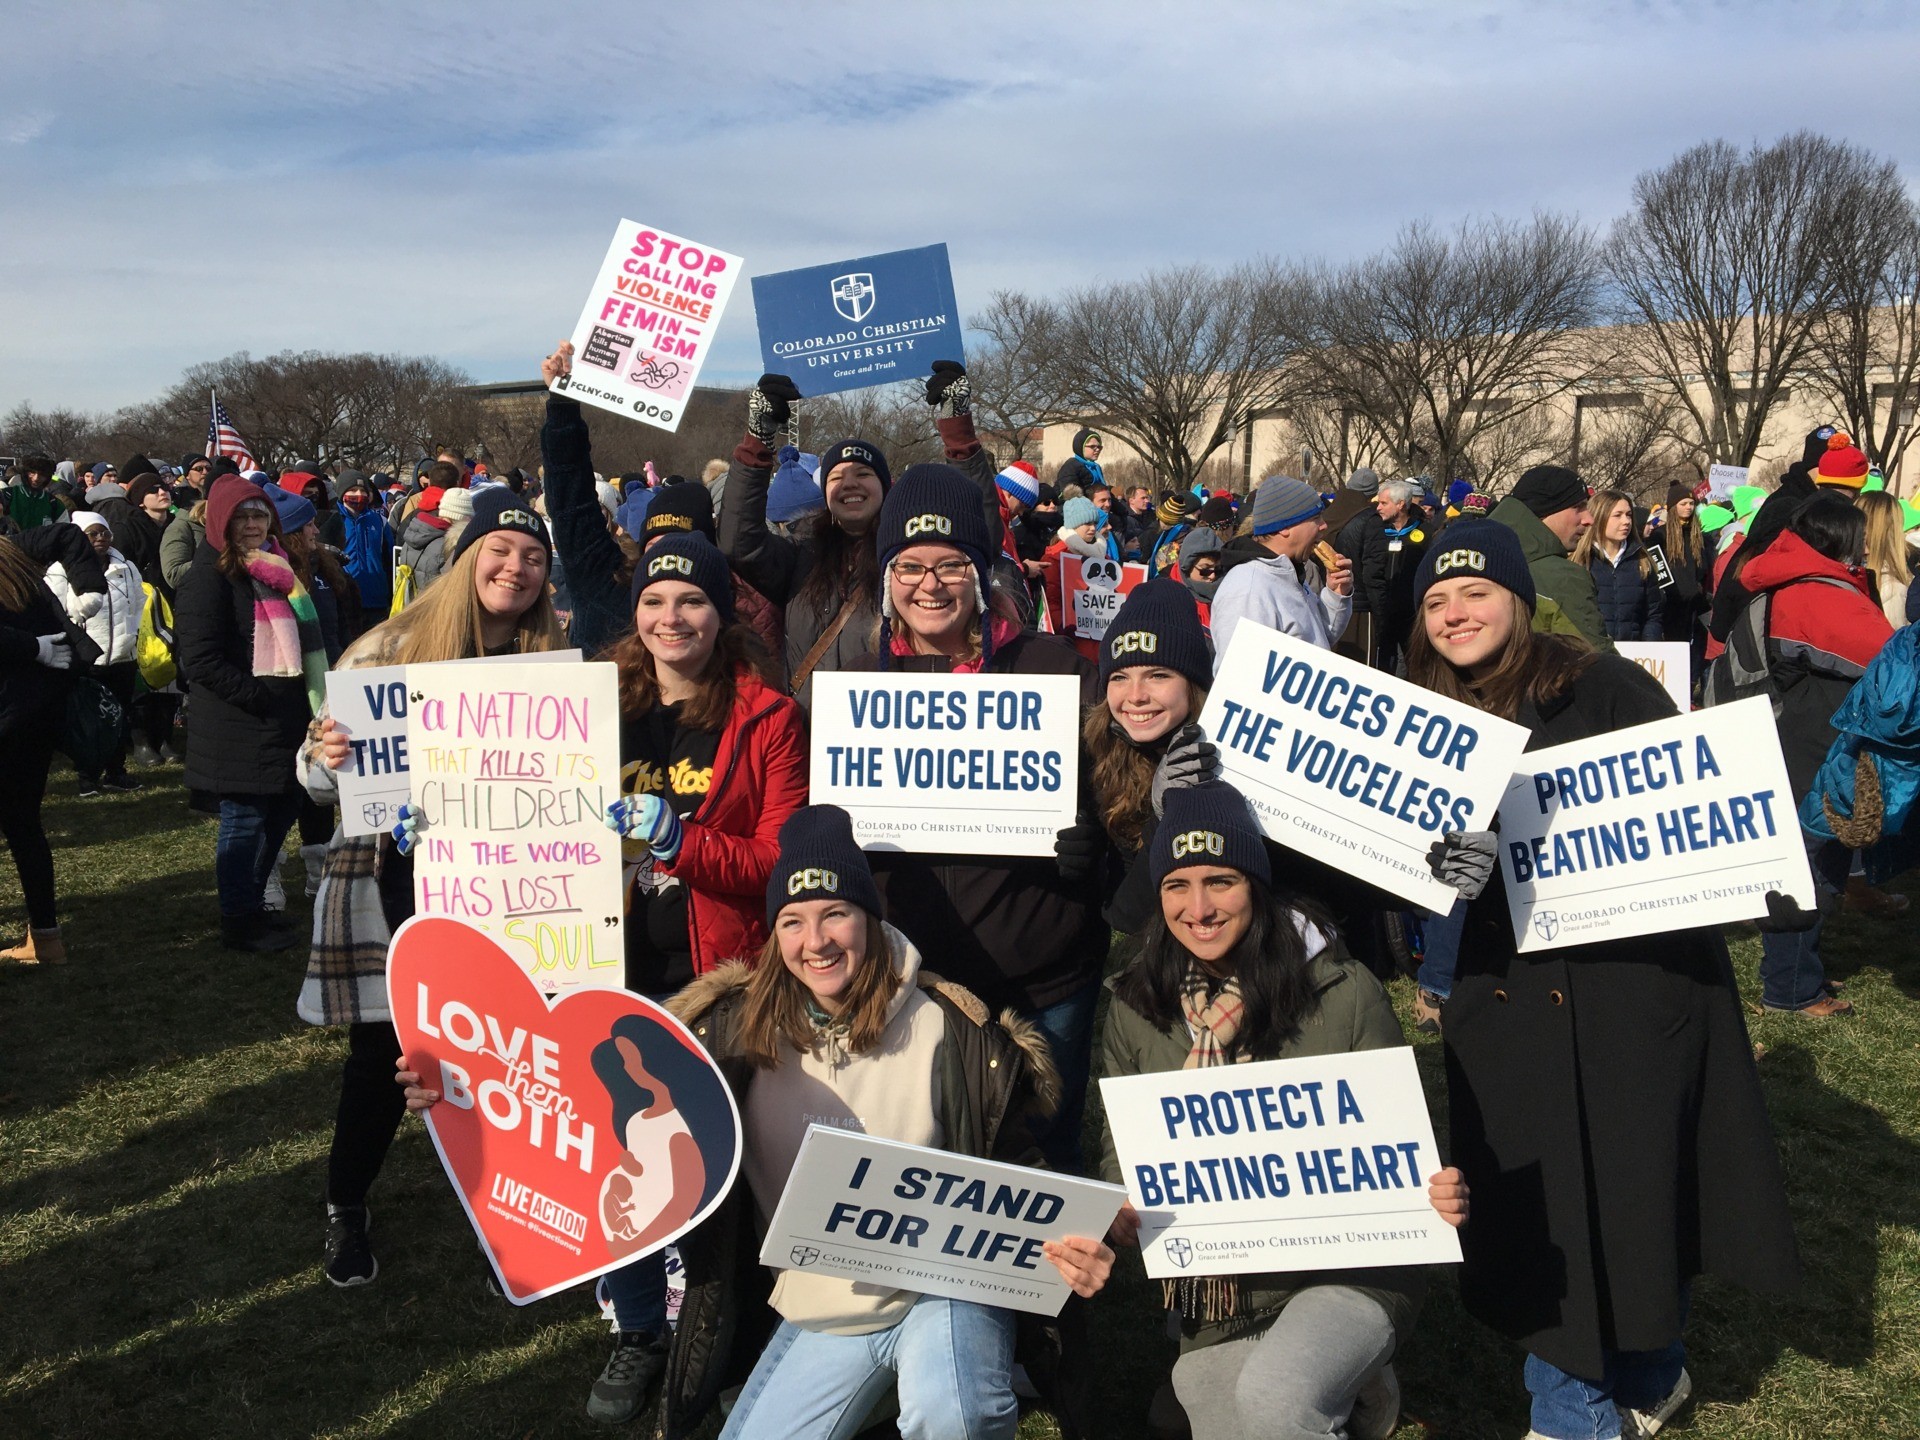 March for Life 2022, National Mall, Washington, DC. (Breitbart News / Breccan F. Thies)